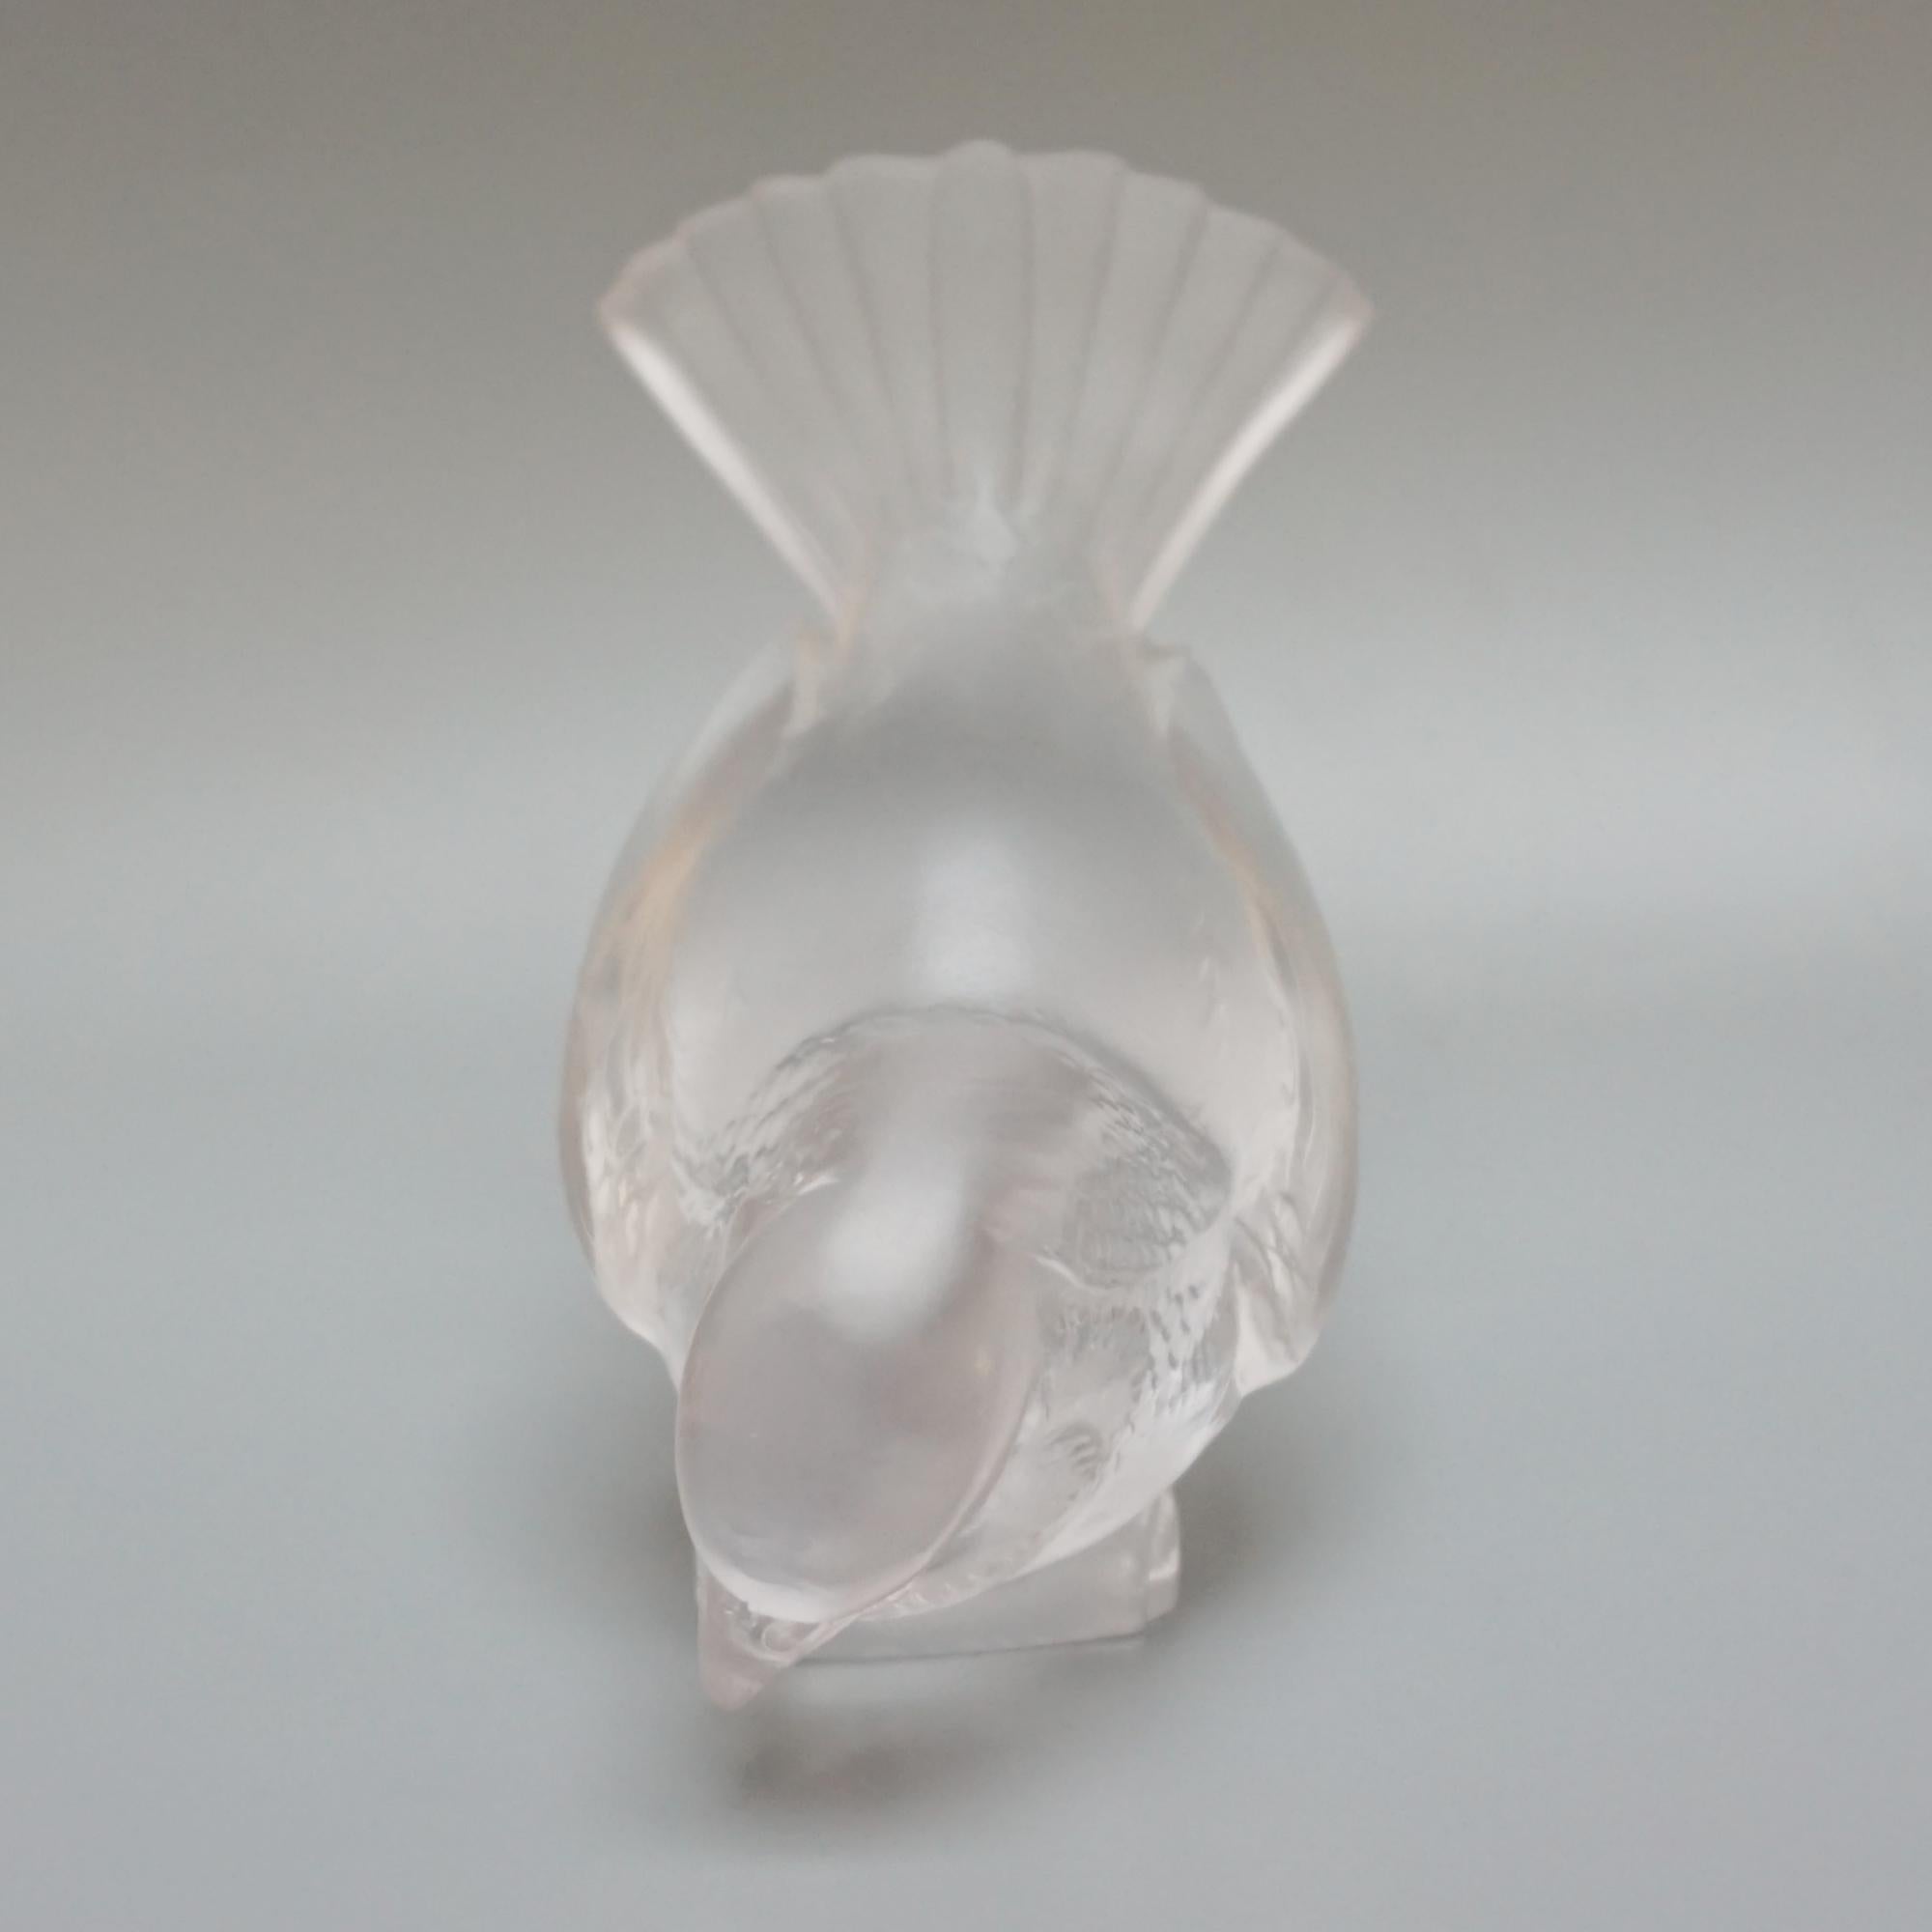 Mid-20th Century 'Moineau Hardi' Art Deco Glass Paperweight by Rene Lalique  For Sale